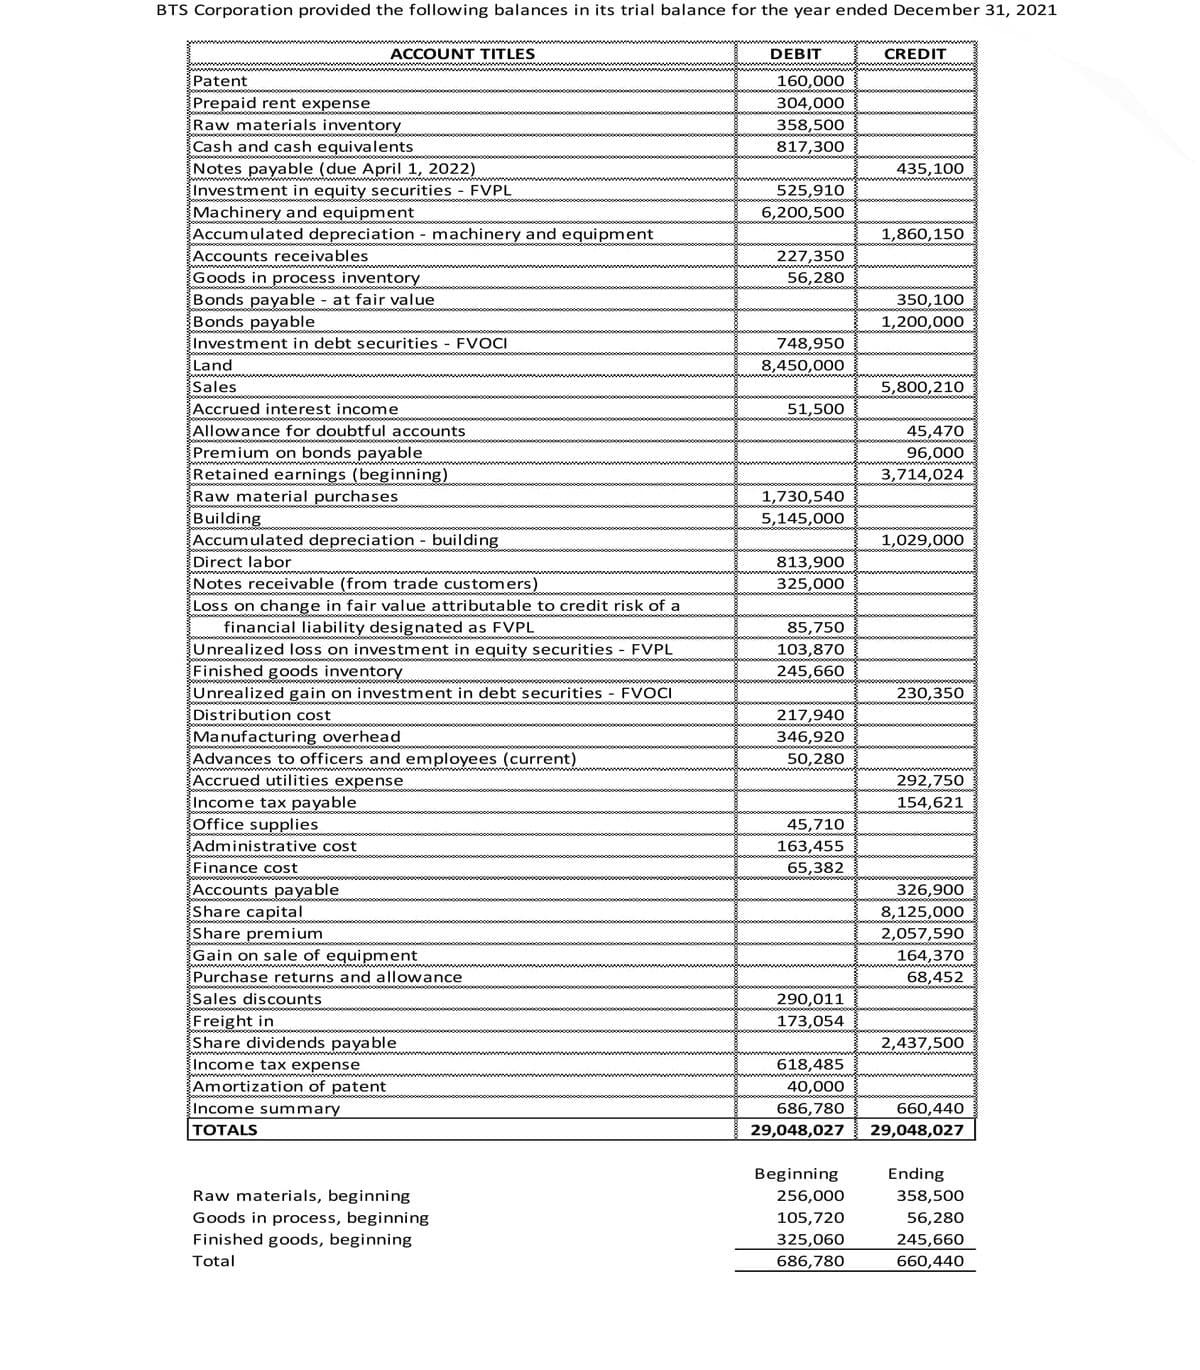 BTS Corporation provided the following balances in its trial balance for the year ended December 31, 2021
ACCOUNT TITLES
DEBIT
CREDIT
Patent
160,000
Prepaid rent expense
Raw materials inventory
Cash and cash equivalents
Notes payable (due April 1, 2022)
Investment in equity securities - FVPL
Machinery and equipment
Accumulated depreciation - machinery and equipment
Accounts receivables
Goods in process inventory
Bonds payable at fair value
Bonds payable
304,000
358,500
817,300
435,100
525,910
6,200,500
1,860,150
227,350
56,280
350,100
1,200,000
Investment in debt securities - FVOCI
748,950
Land
8,450,000
Sales
5,800,210
Accrued interest income
51,500
Allowance for doubtful accounts
45,470
Premium on bonds payable
Retained earnings (beginning)
Raw material purchases
Building
Accumulated depreciation - building
Direct labor
Notes receivable (from trade customers)
Loss on change in fair value attributable to credit risk of a
financial liability designated as FVPL
Unrealized loss on investment in equity securities - FVPL
Finished goods inventory
Unrealized gain on investment in debt securities
Distribution cost
Manufacturing overhead
Advances to officers and employees (current)
Accrued utilities expense
Income tax payable
Office supplies
Administrative cost
96,000
3,714,024
1,730,540
5,145,000
1,029,000
813,900
325,000
85,750
103,870
245,660
FVOCI
230,350
217,940
346,920
50.280
292,750
154,621
45,710
163,455
Finance cost
65,382
Accounts payable
Share capital
Share premium
Gain on sale of equipment
Purchase returns and allowance
Sales discounts
Freight in
Share dividends payable
326,900
8,125,000
2,057,590
164,370
68,452
290,011
173,054
2,437,500
Income tax expense
618,485
Amortization of patent
Income summary
TOTALS
40,000
686,780
660,440
29,048,027
29,048,027
Beginning
Ending
358,500
Raw materials, beginning
256,000
Goods in process, beginning
Finished goods, beginning
105,720
56,280
325,060
245,660
Total
686,780
660,440
